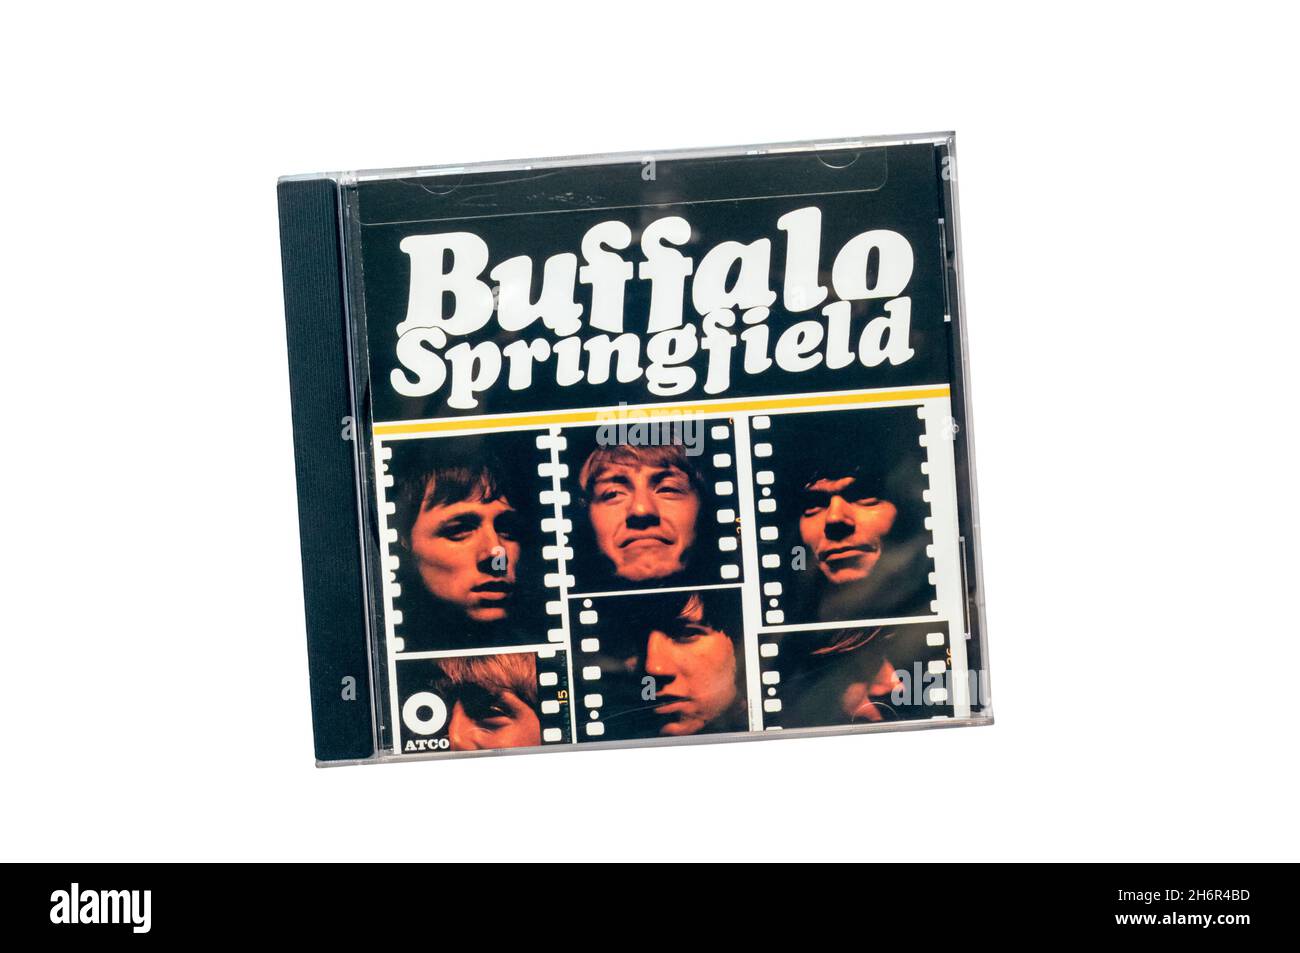 Buffalo Springfield was the eponymous first album by folk rock band Buffalo Springfield.  Released in 1966. Stock Photo